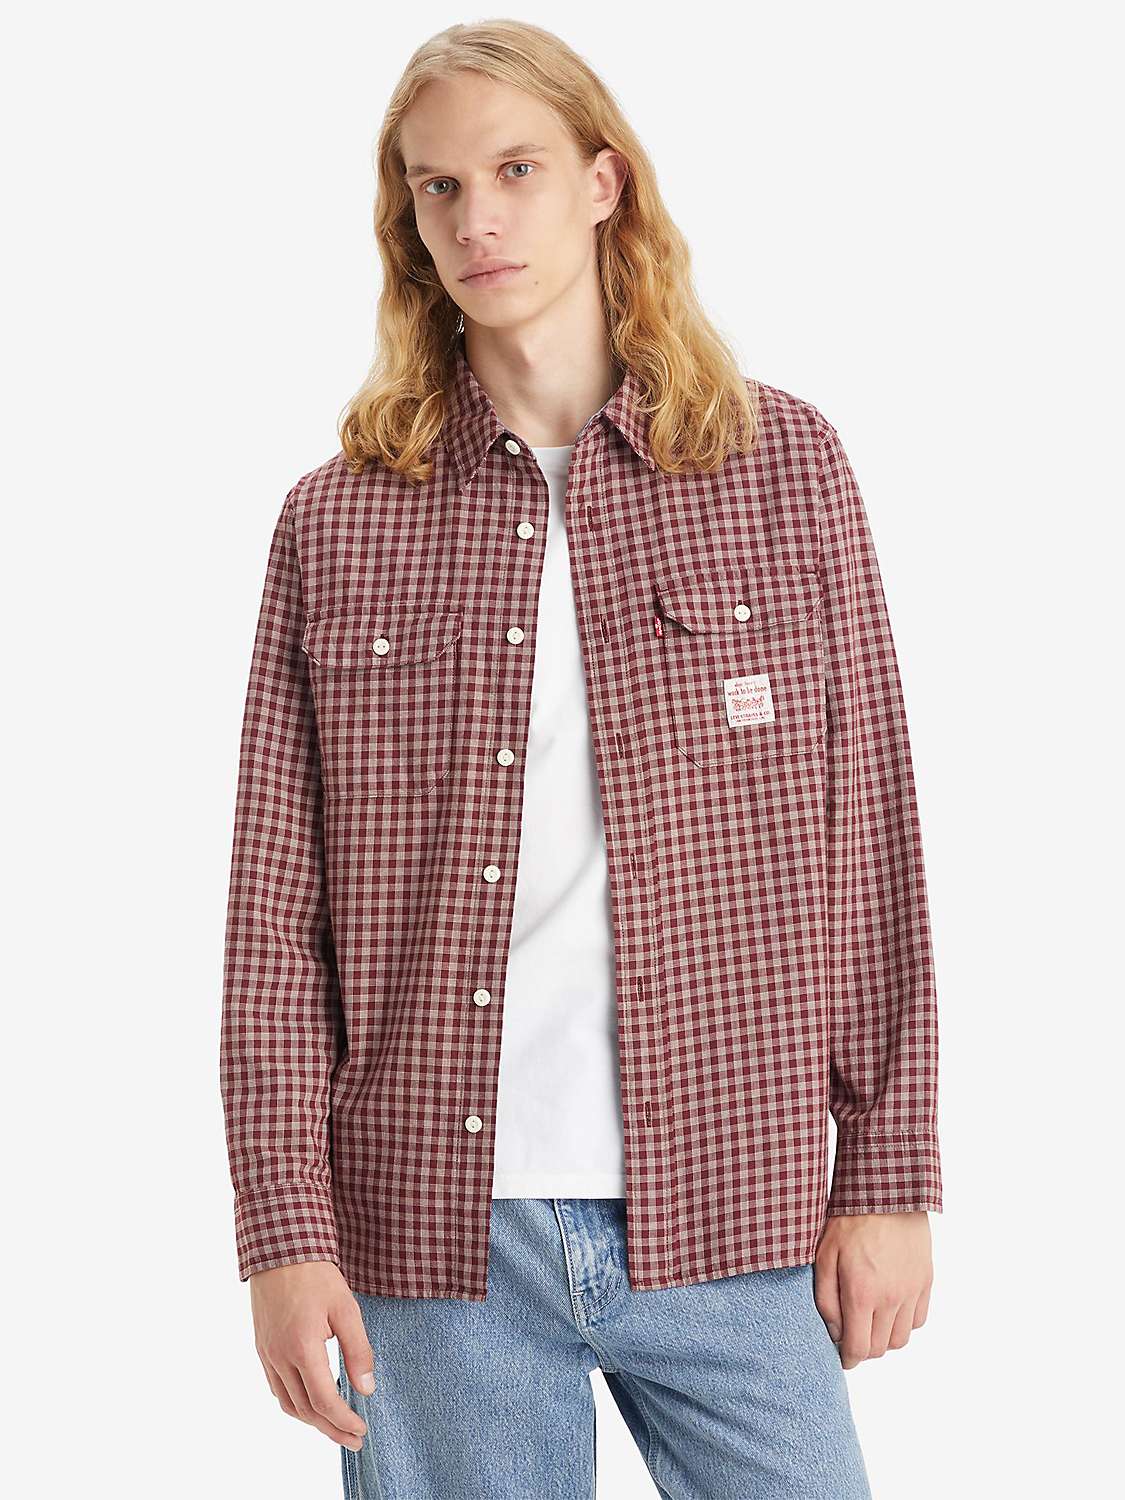 Buy Levi's Classic Checked Worker Shirt, Red/Multi Online at johnlewis.com